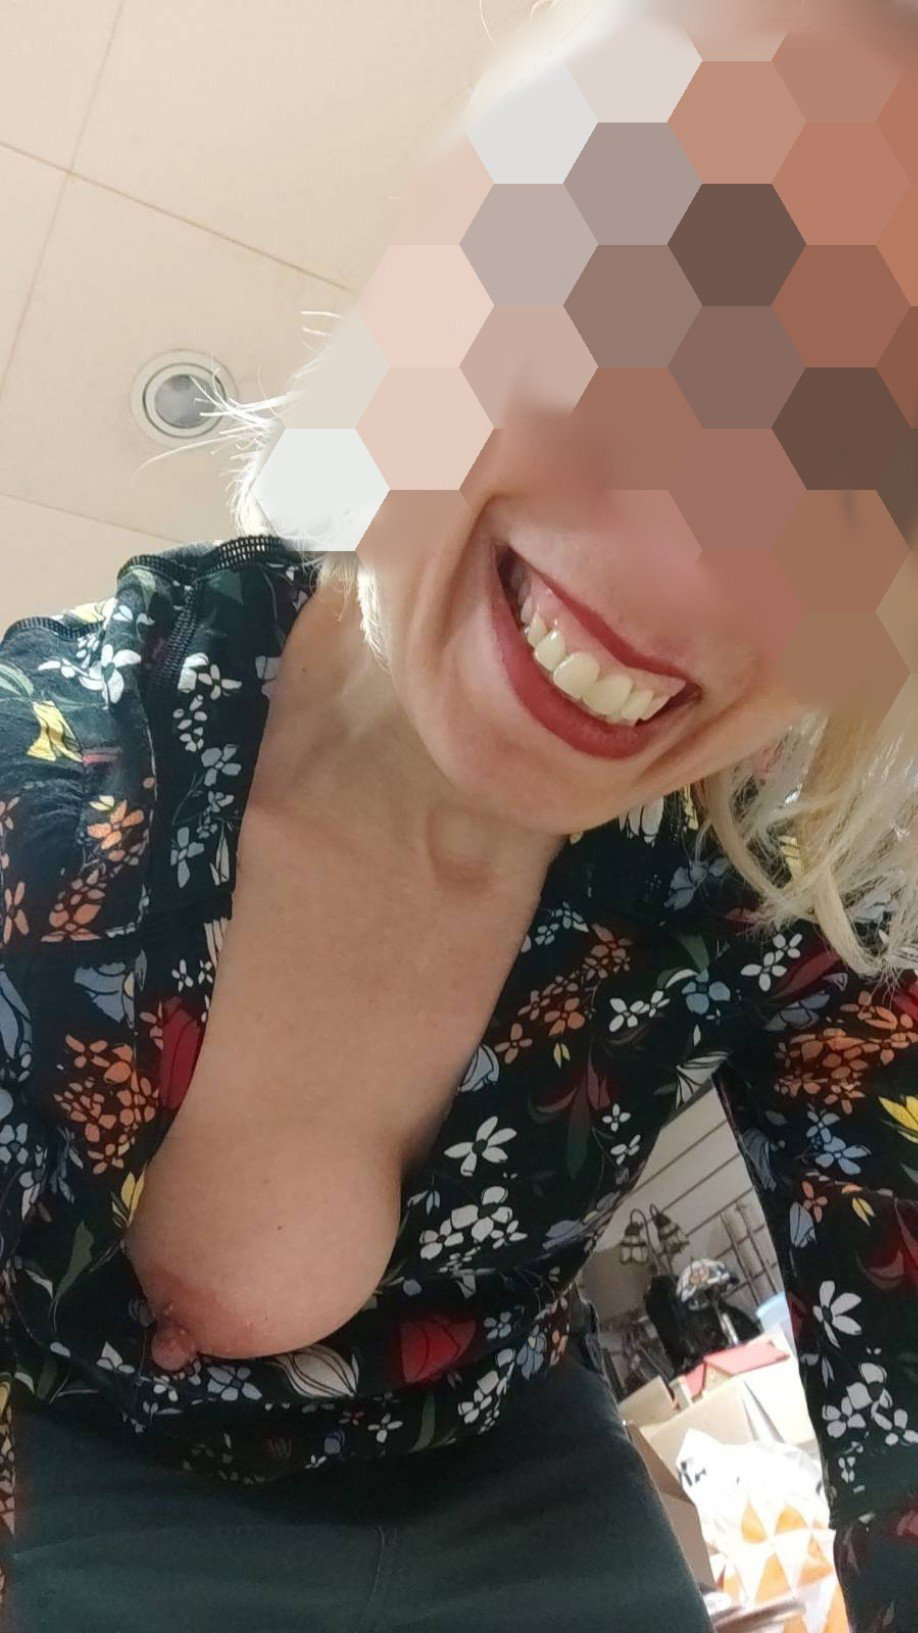 Photo by Joker_and_Harley with the username @Joker-and-Harley, who is a verified user,  May 9, 2022 at 2:24 PM. The post is about the topic Working Nudes and the text says 'Share,Like,Flame and comment... and more Cock/Cumtribute very welcome ... plenty of choice on our gallery....and tag to let us know of course!!'